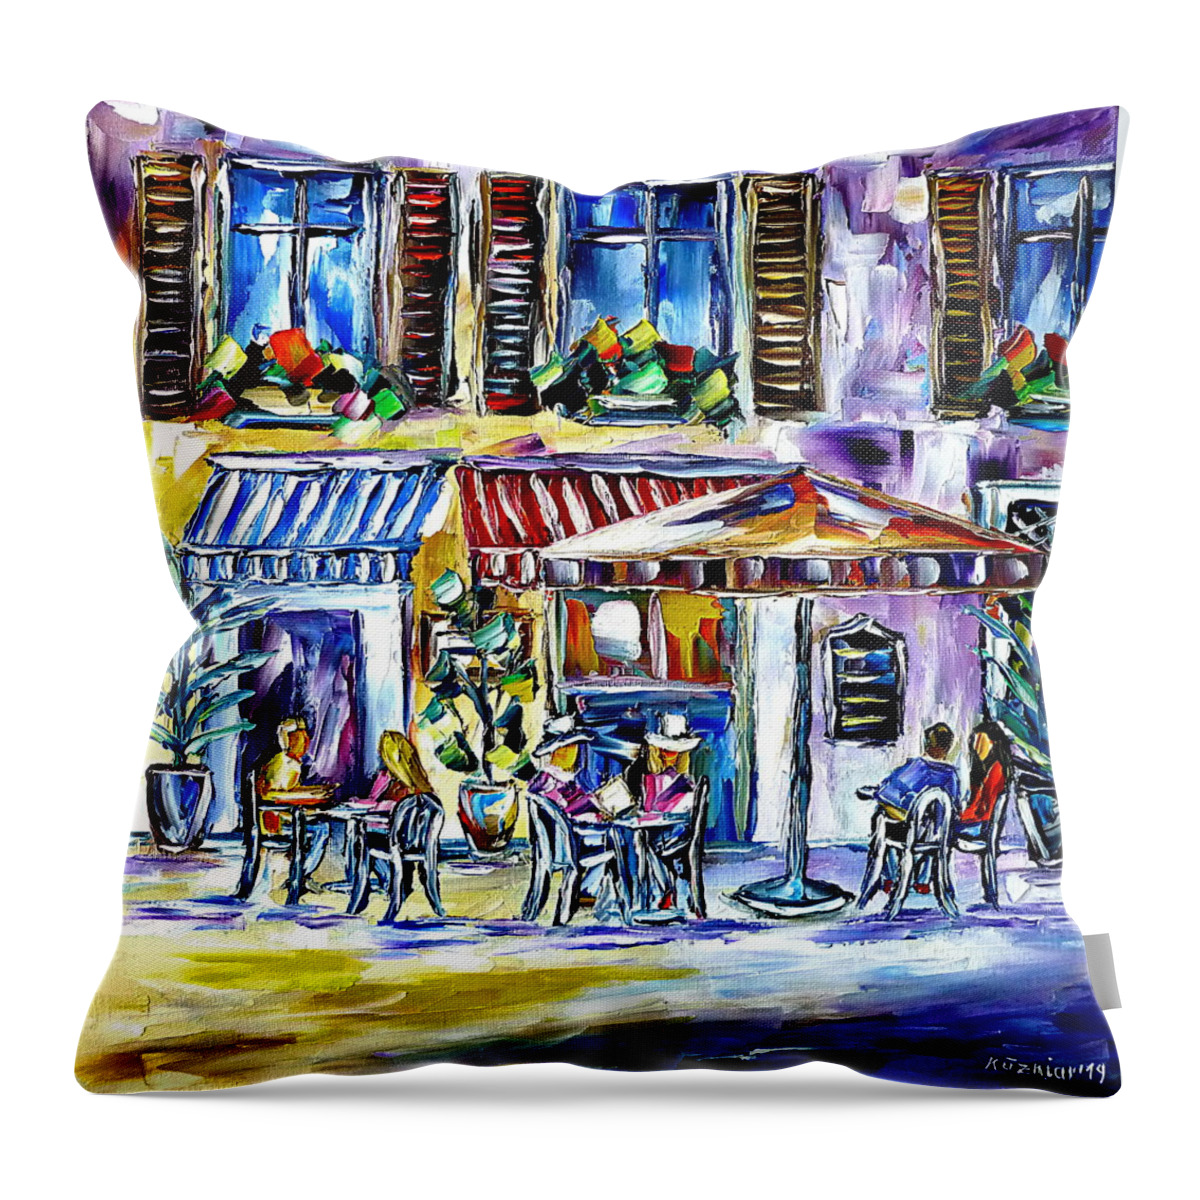 Cafe In Venice Throw Pillow featuring the painting La Dolce Vita #2 by Mirek Kuzniar